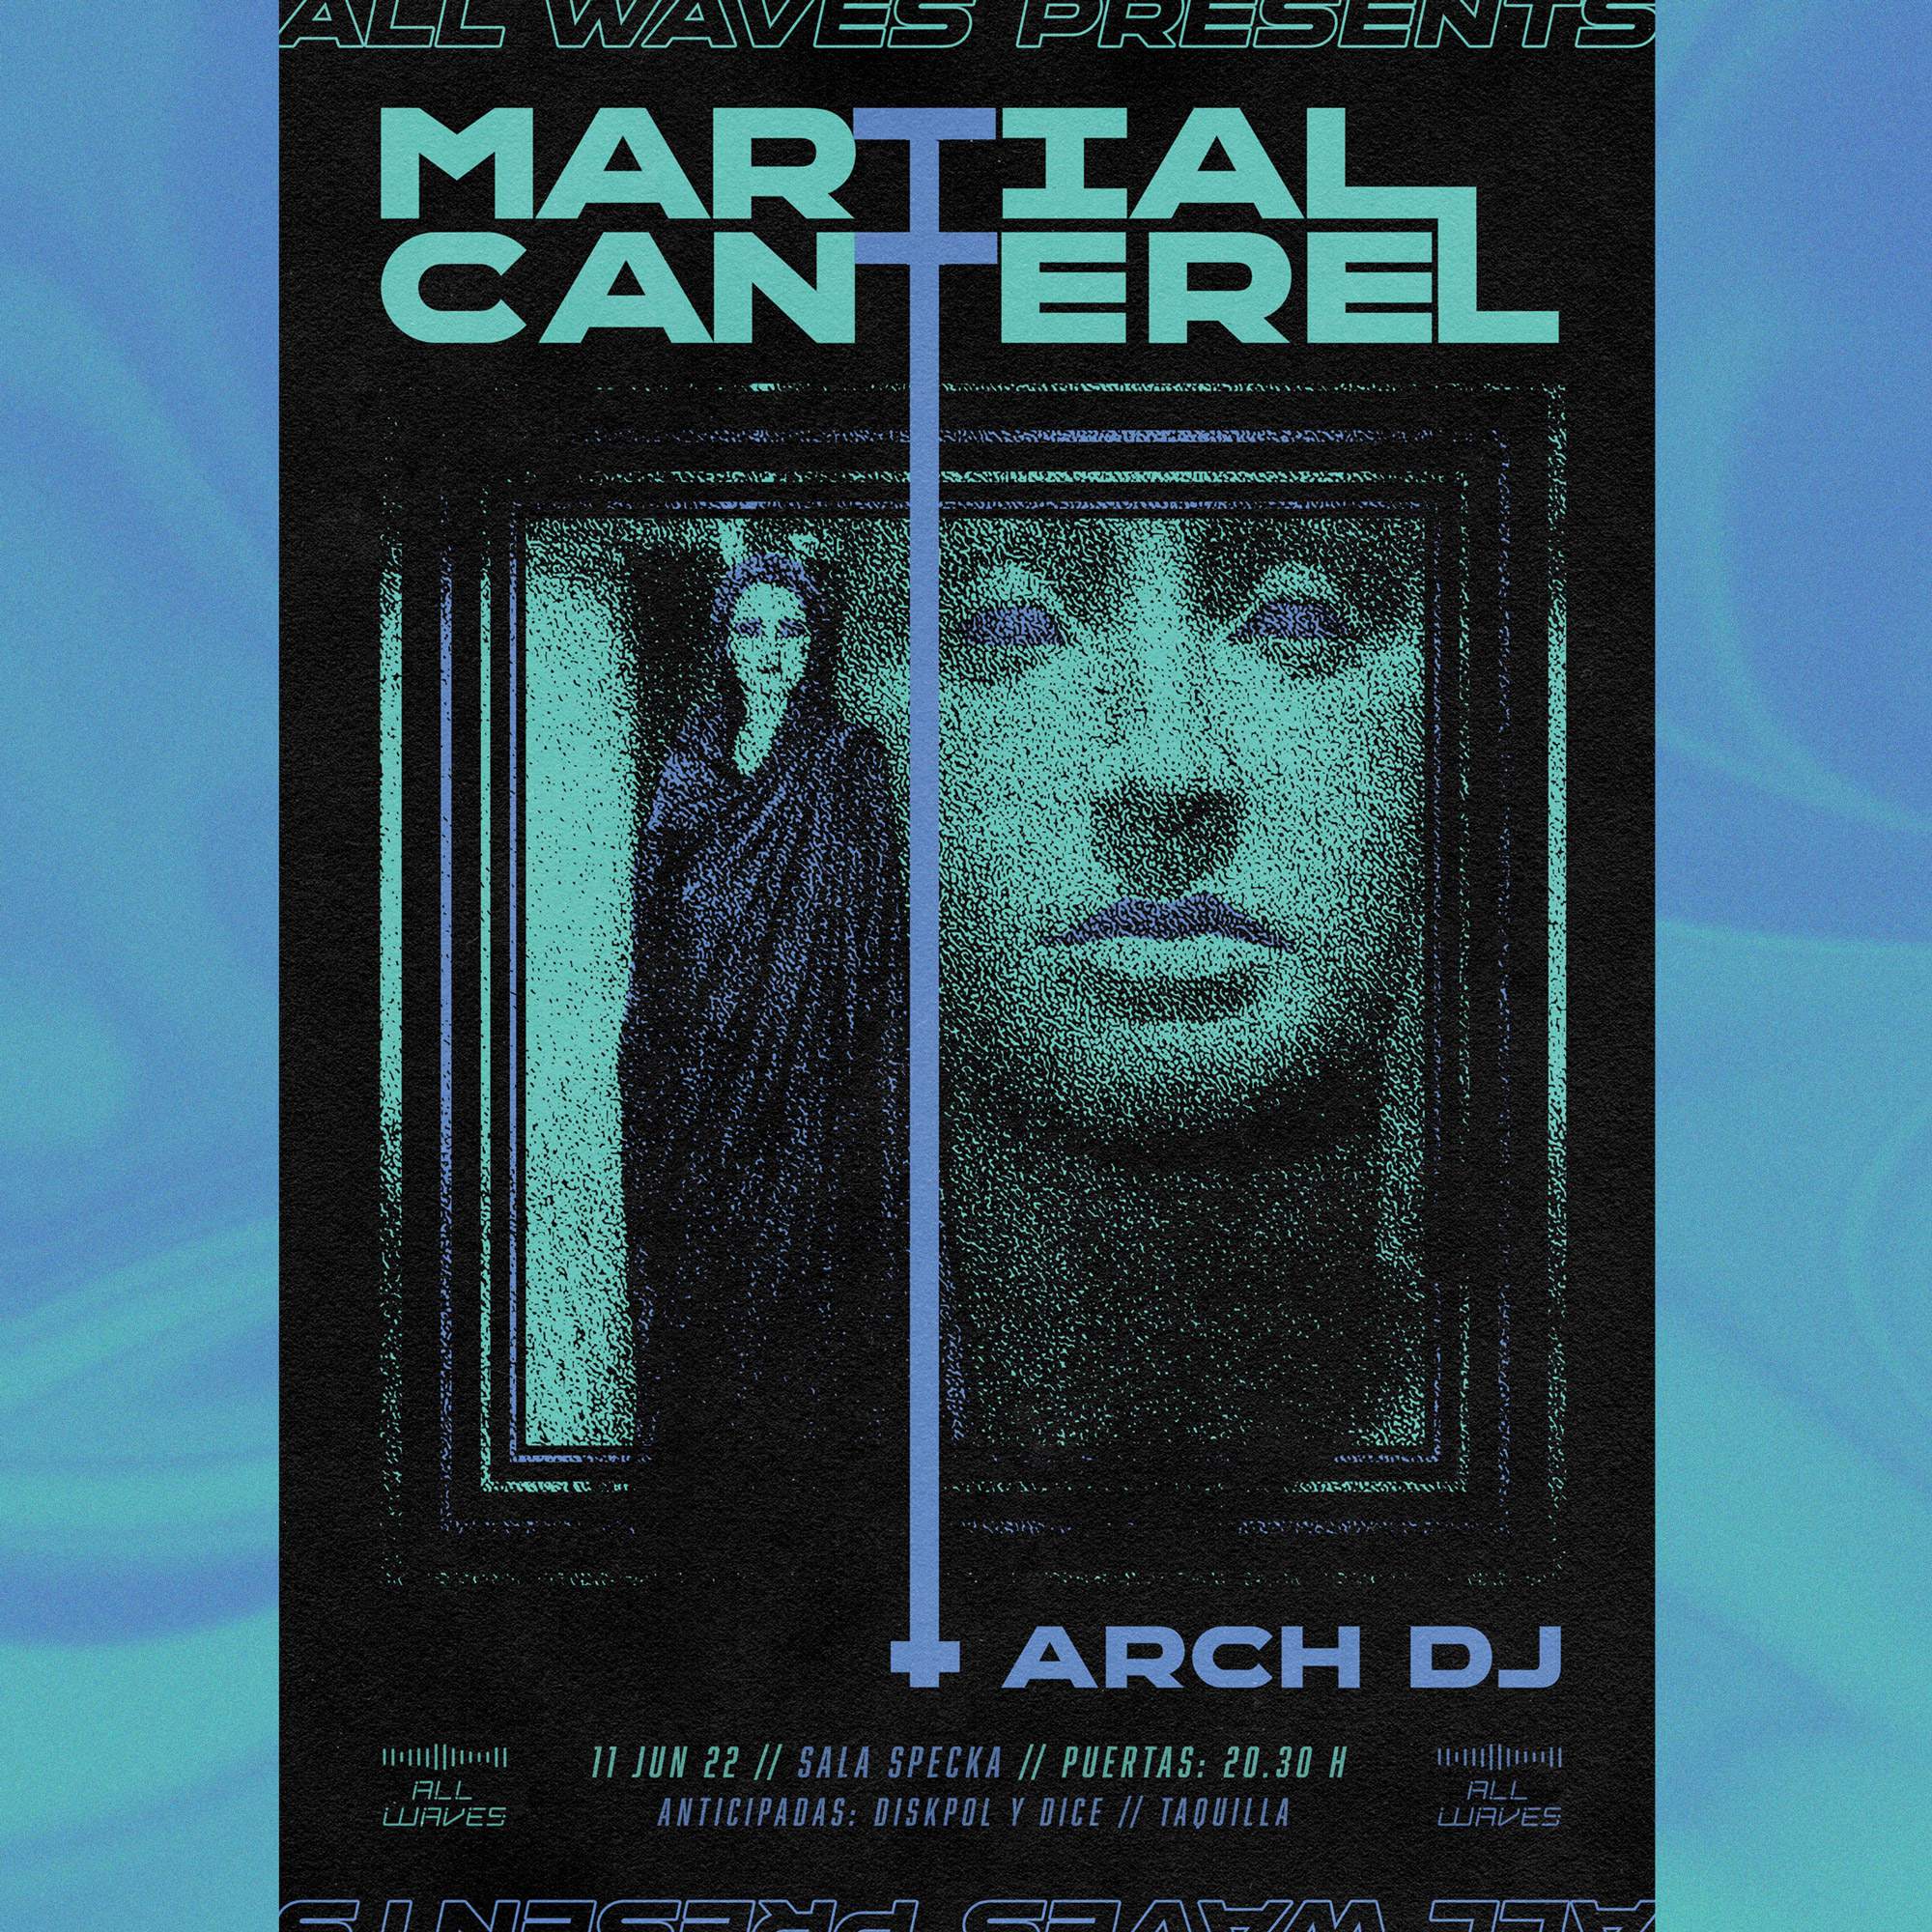 Martial Canterel + Arch DJ at All Waves - フライヤー表